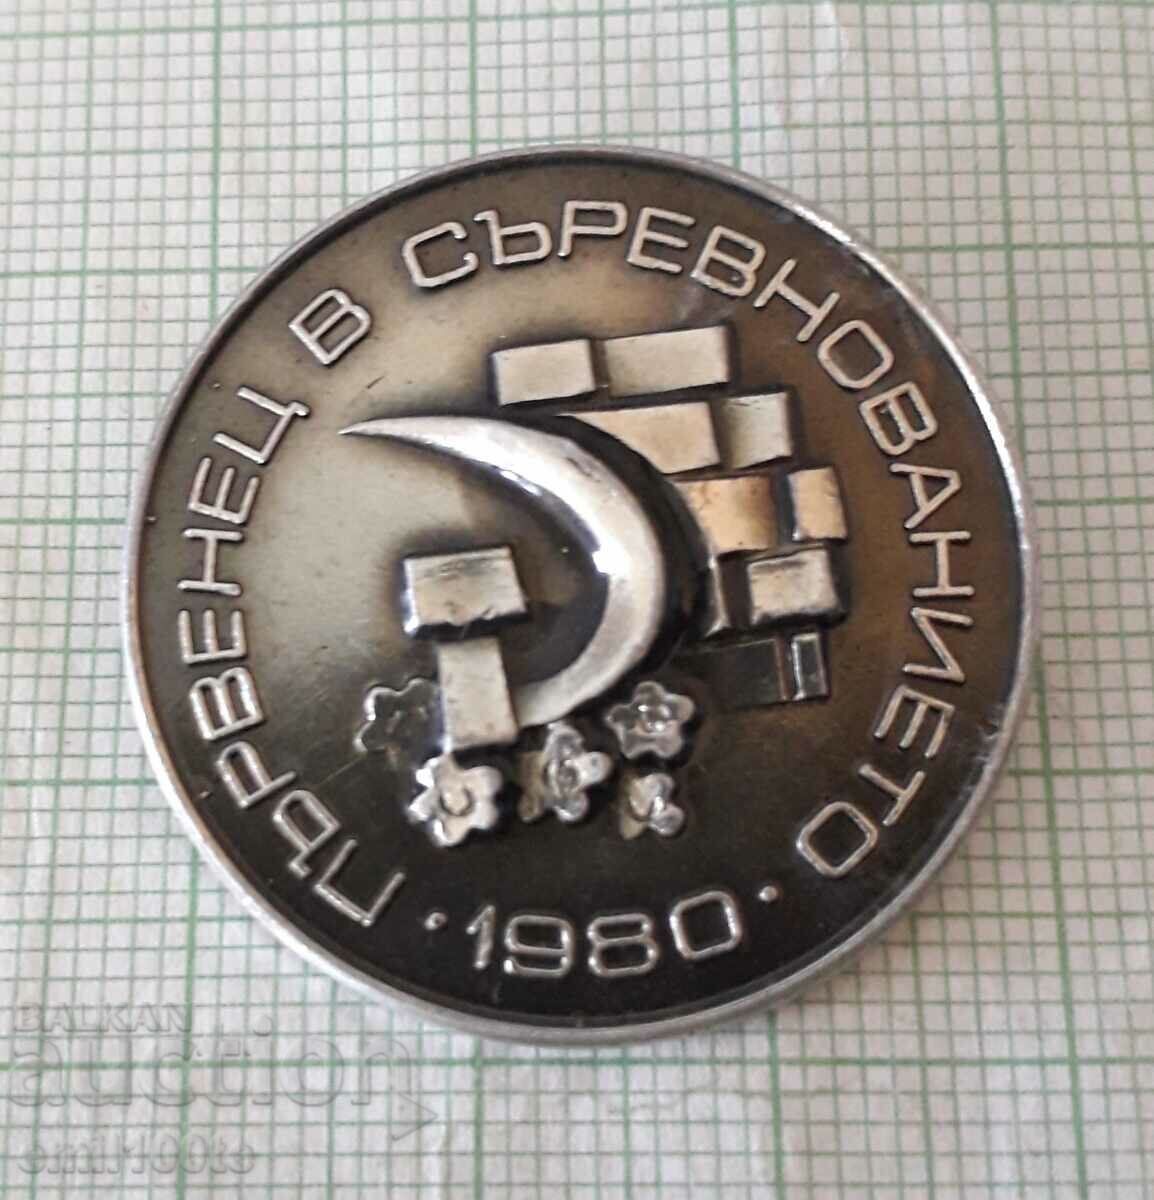 Badge - First place in the 1980 competition